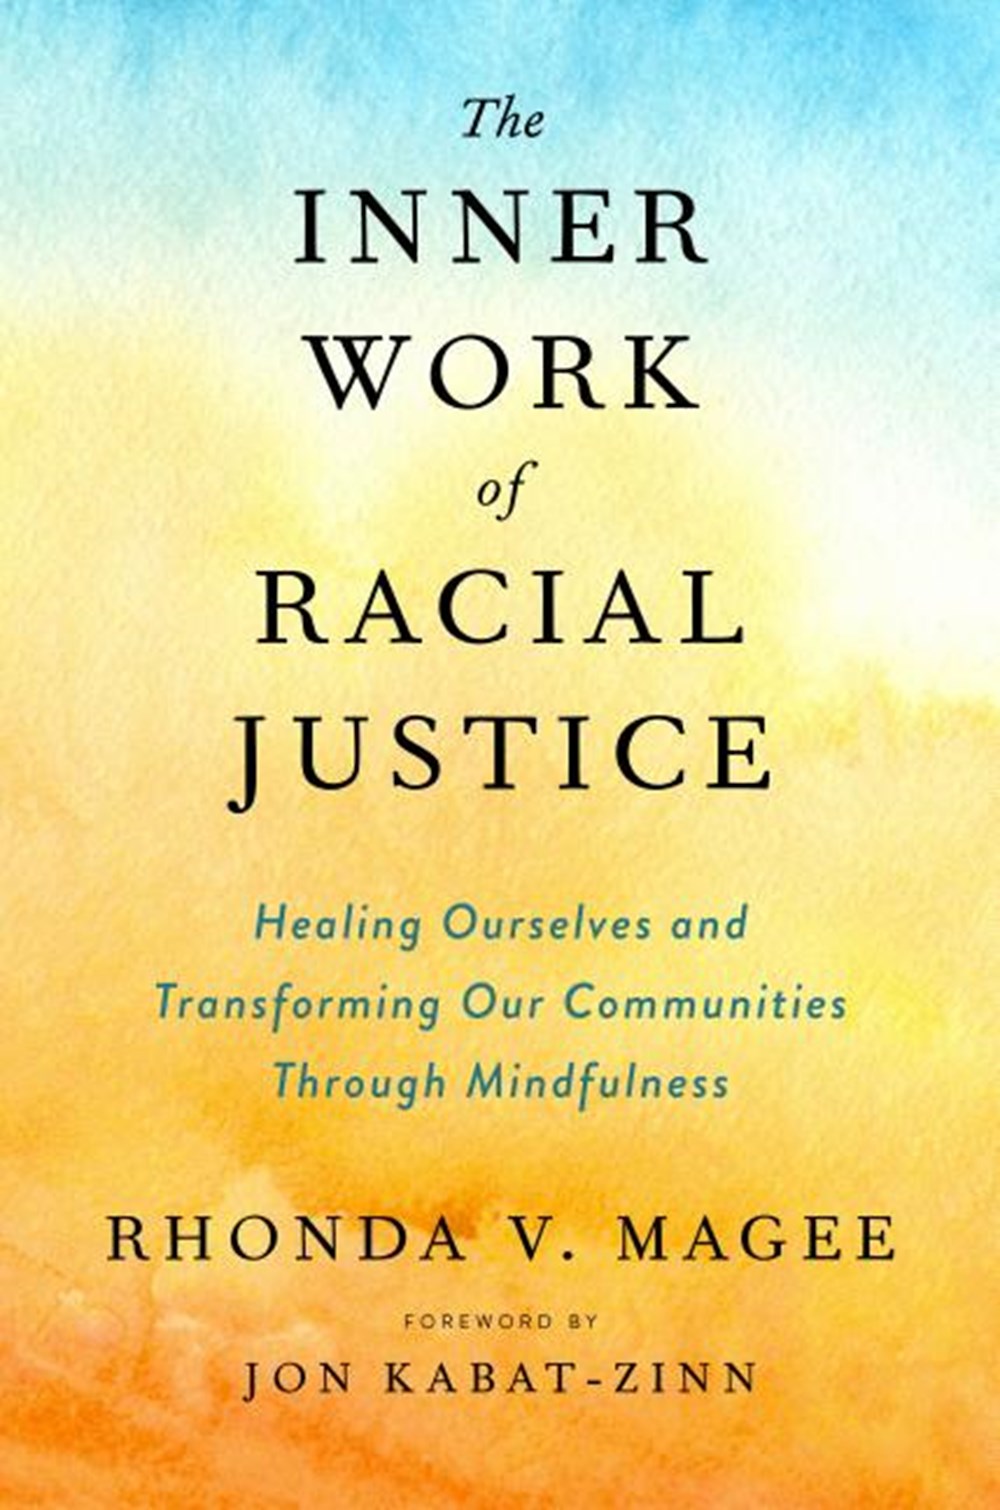 Inner Work of Racial Justice: Healing Ourselves and Transforming Our Communities Through Mindfulness